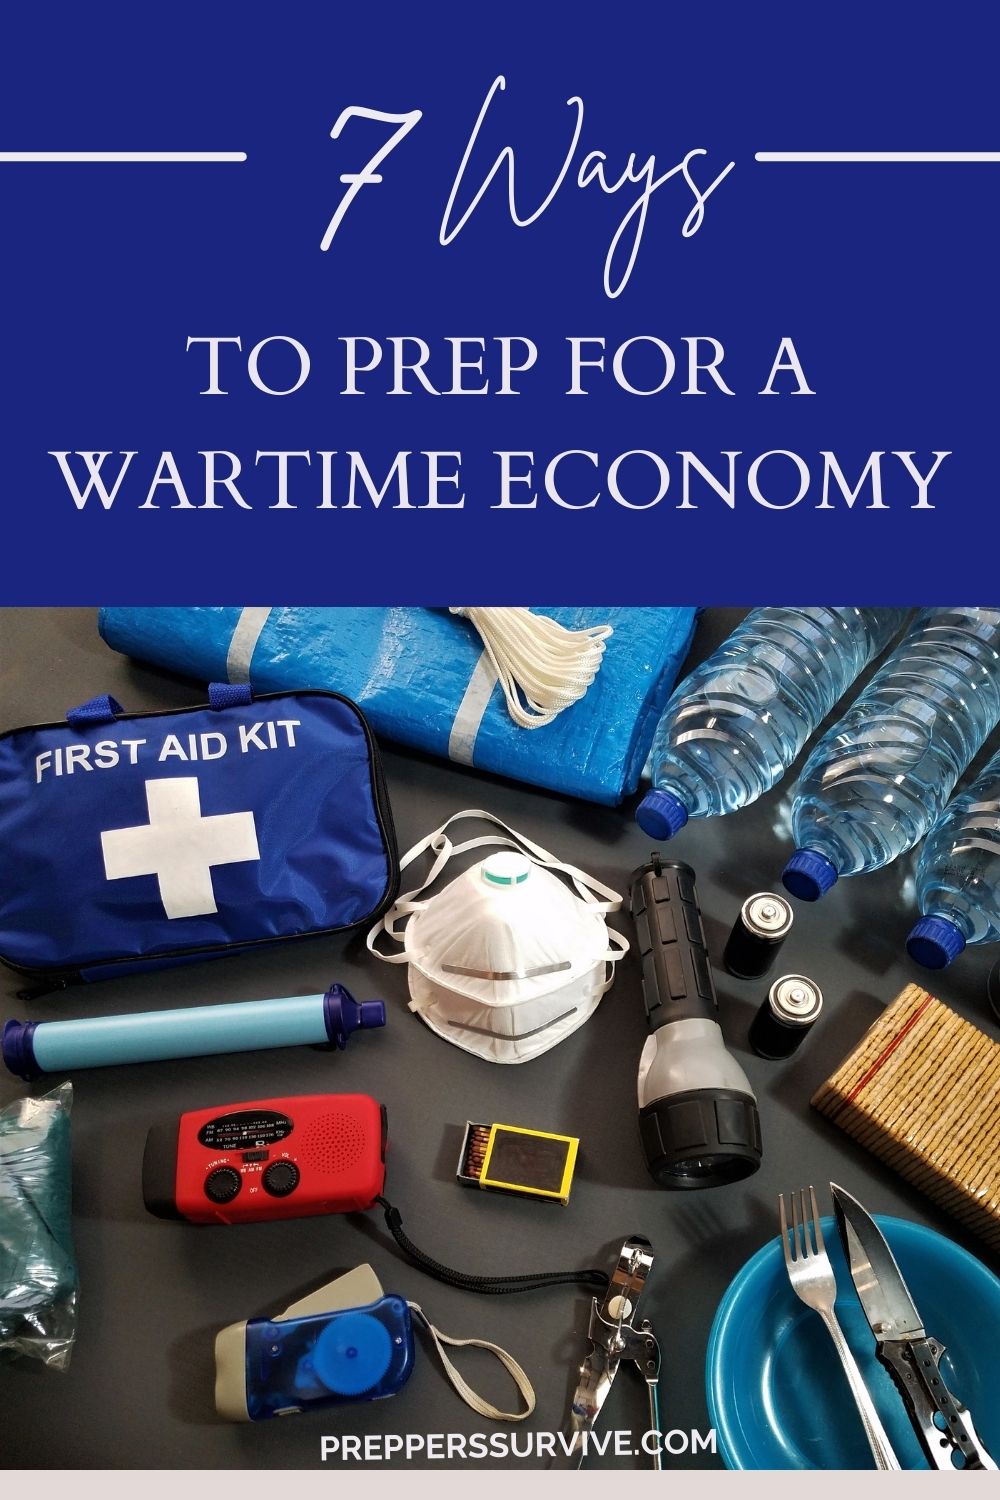 7 Ways to Prep for a Wartime Economy. Supply shortages and how to prepare.